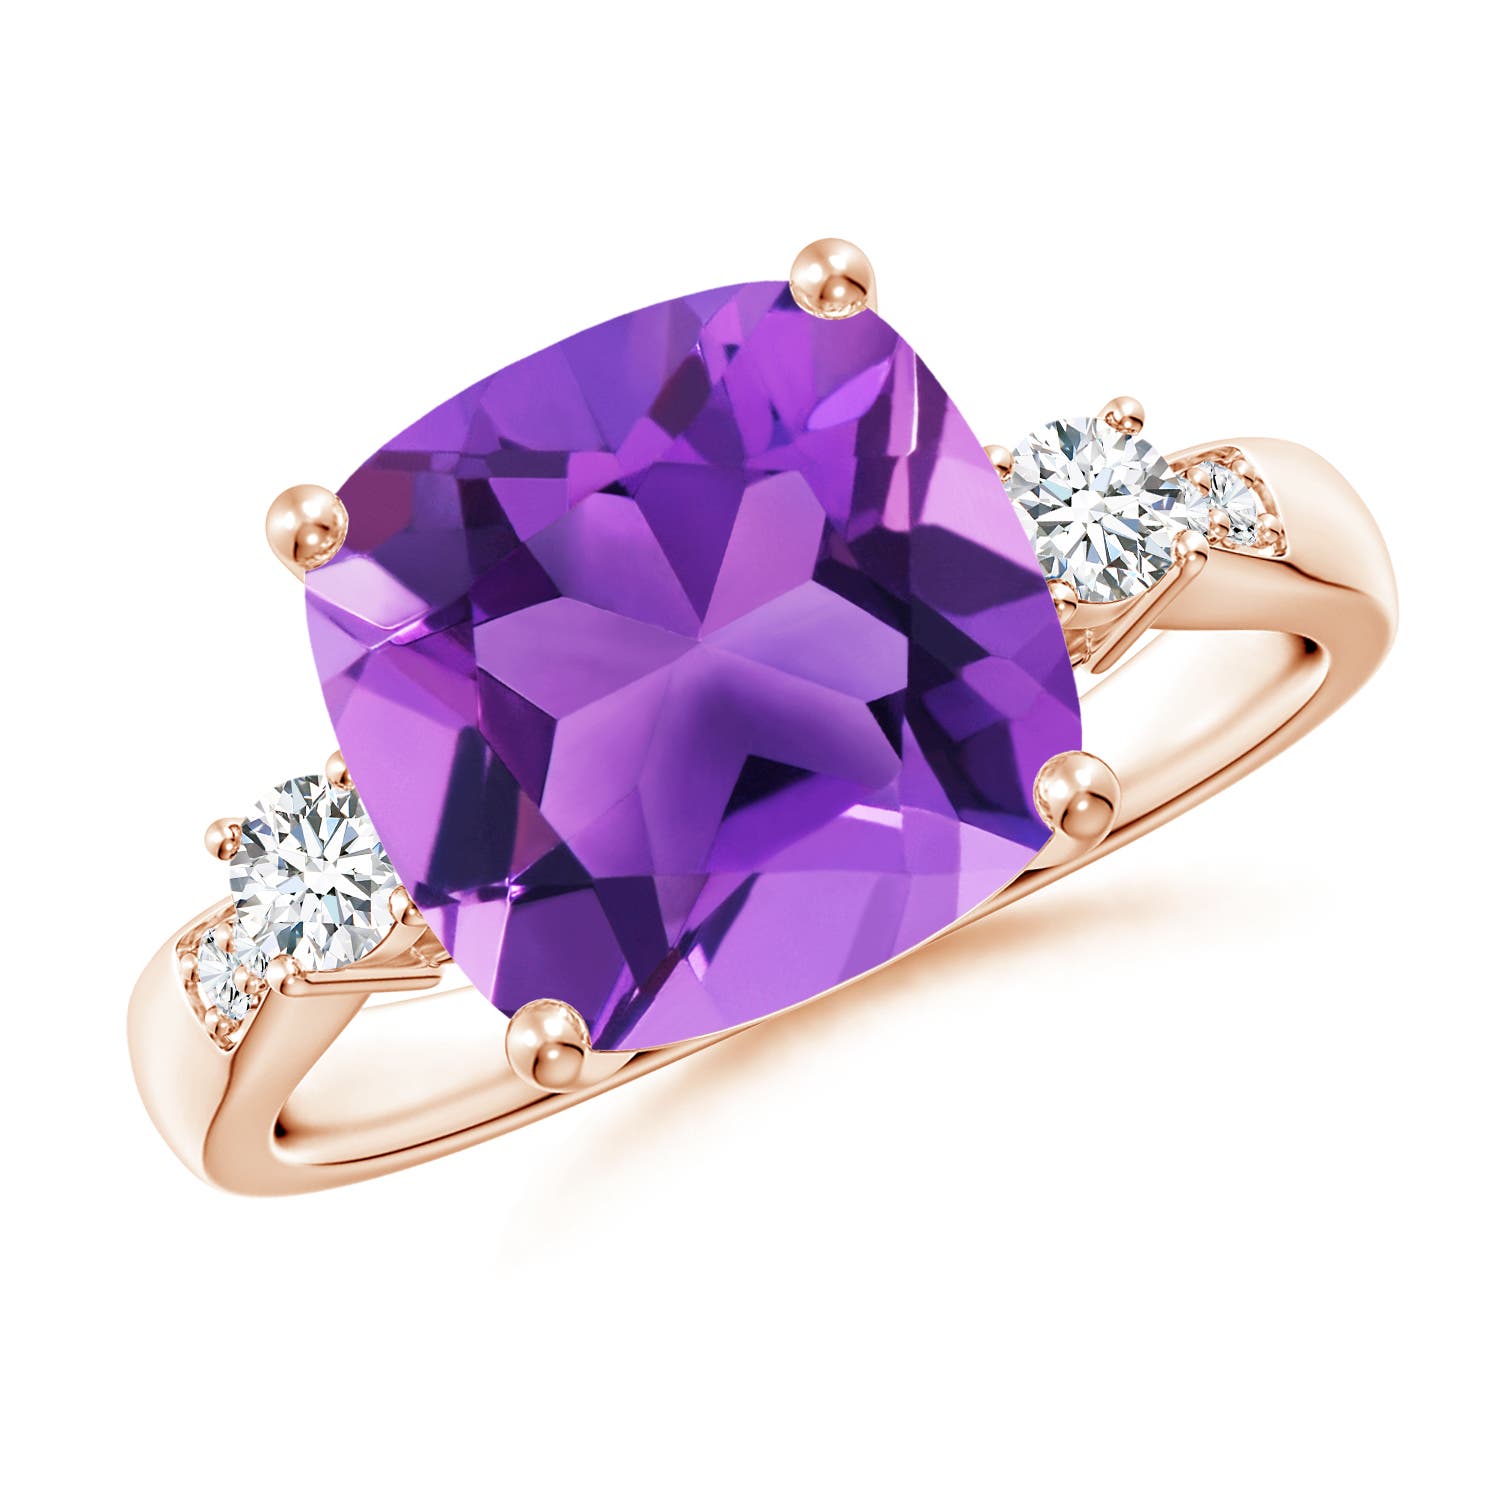 AAA - Amethyst / 3.85 CT / 14 KT Rose Gold